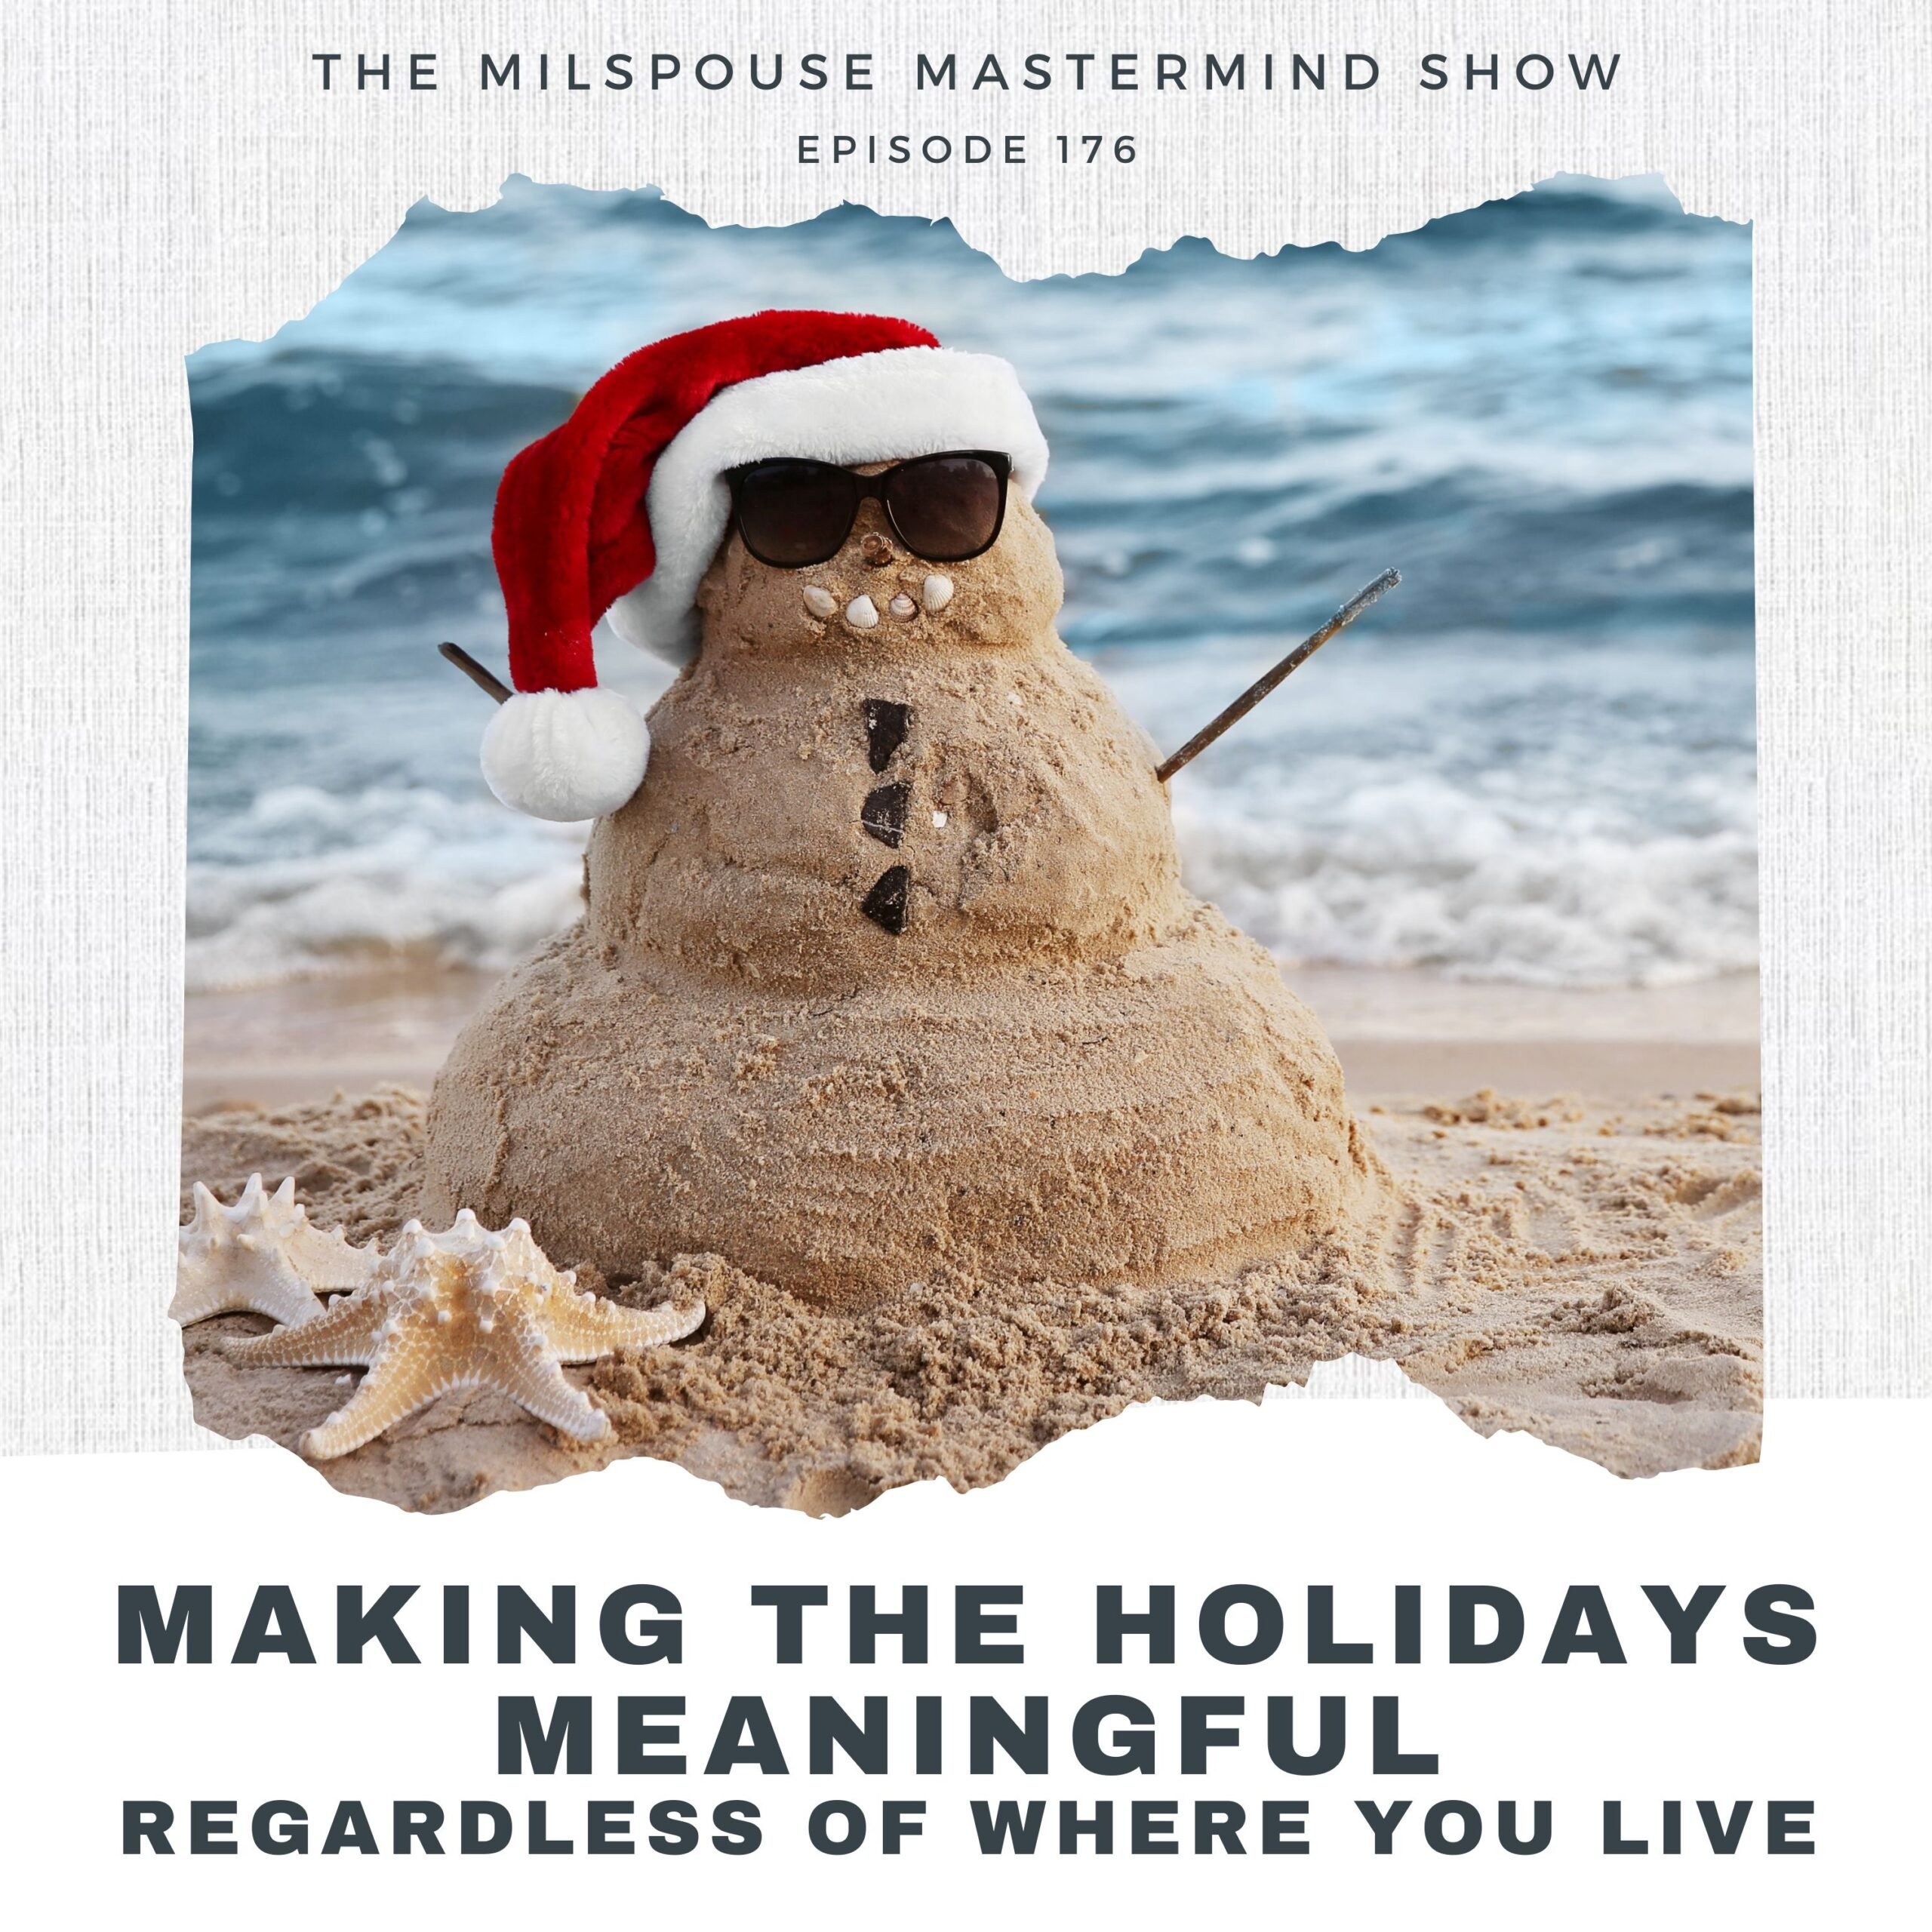 How to Make the Holidays Meaningful as a Military Family